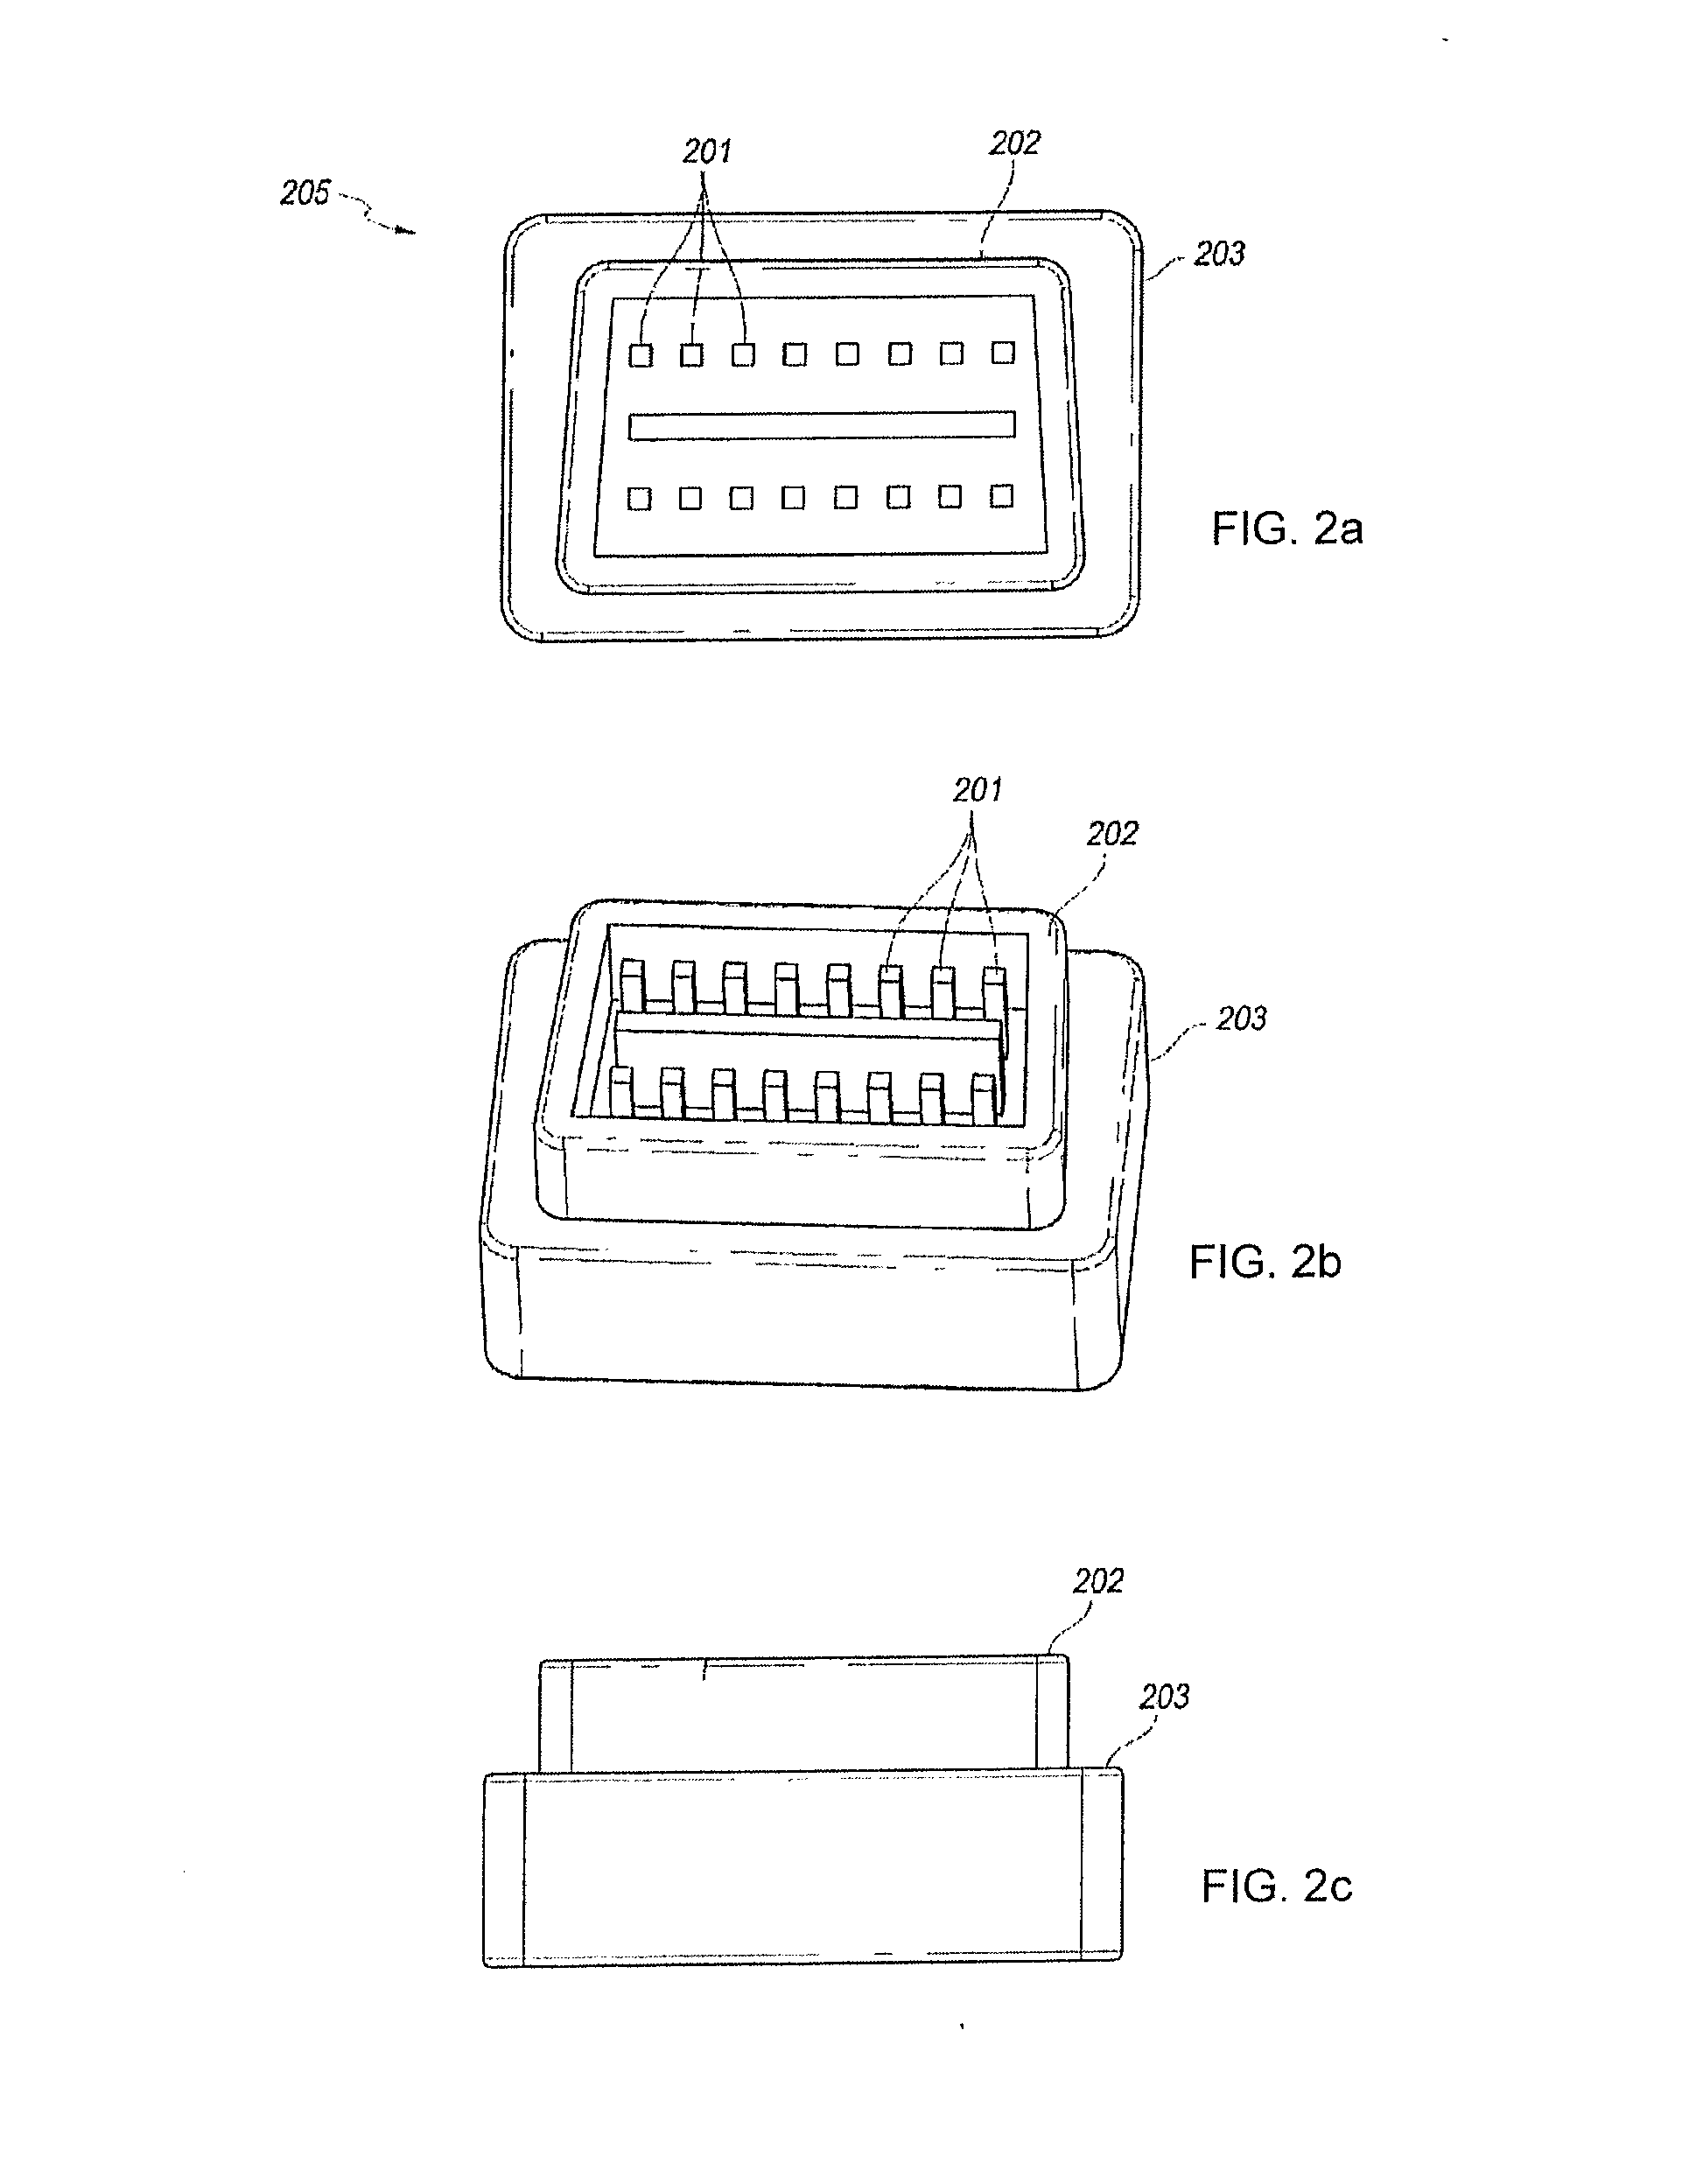 Automobile diagnostic device using dynamic telematic data parsing